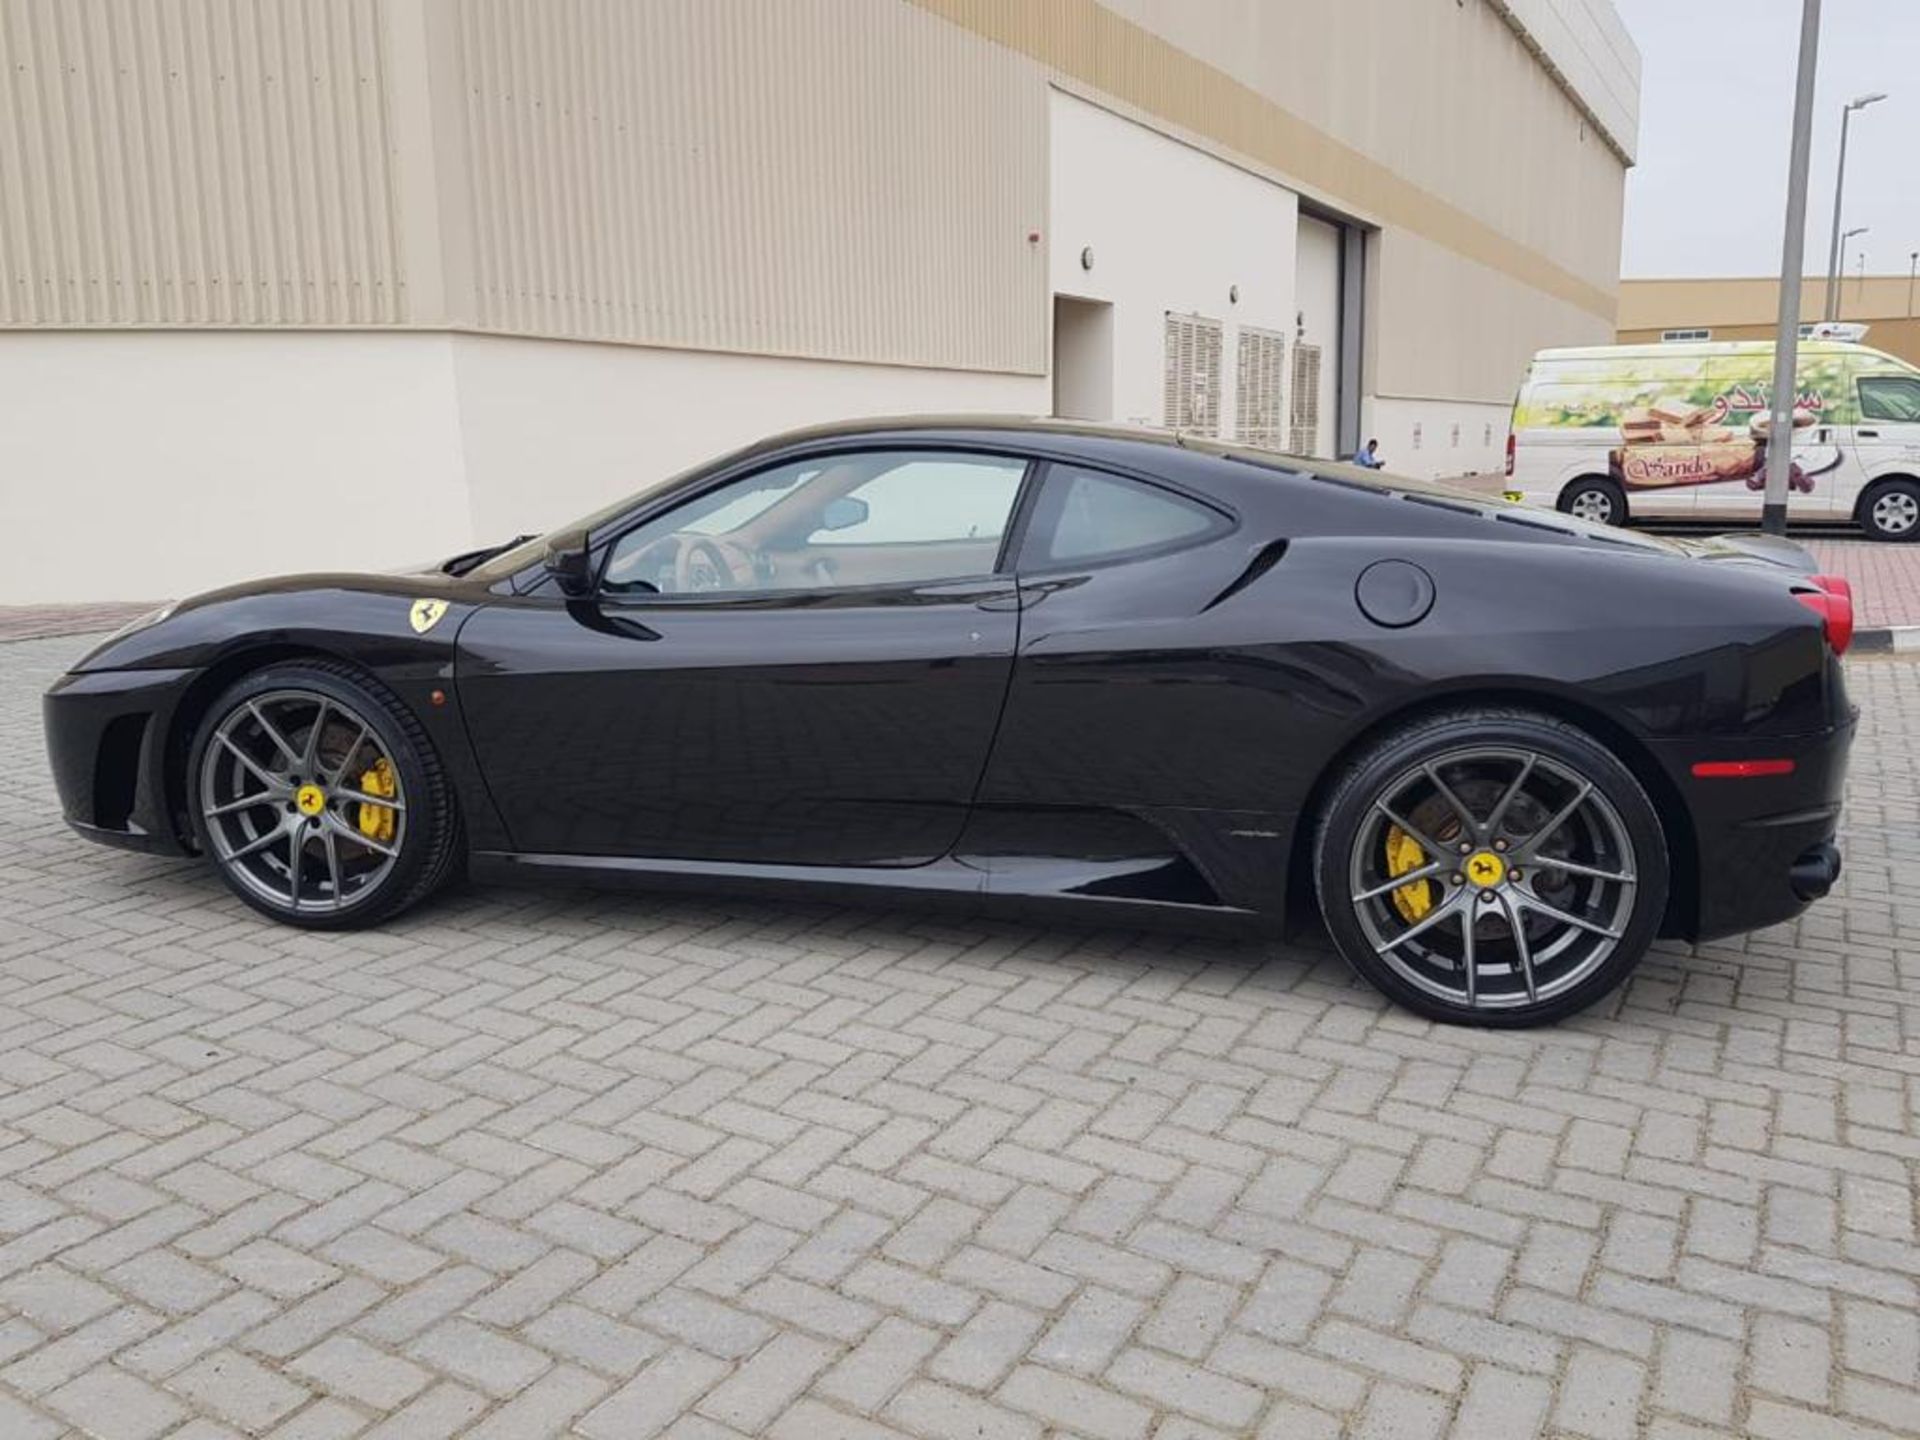 2007 FERRARI F430 BLACK 2 DOOR COUPE 4.3L AUTOMATIC LHD, PERFECT CONDITION INSIDE AND OUT - Image 5 of 13